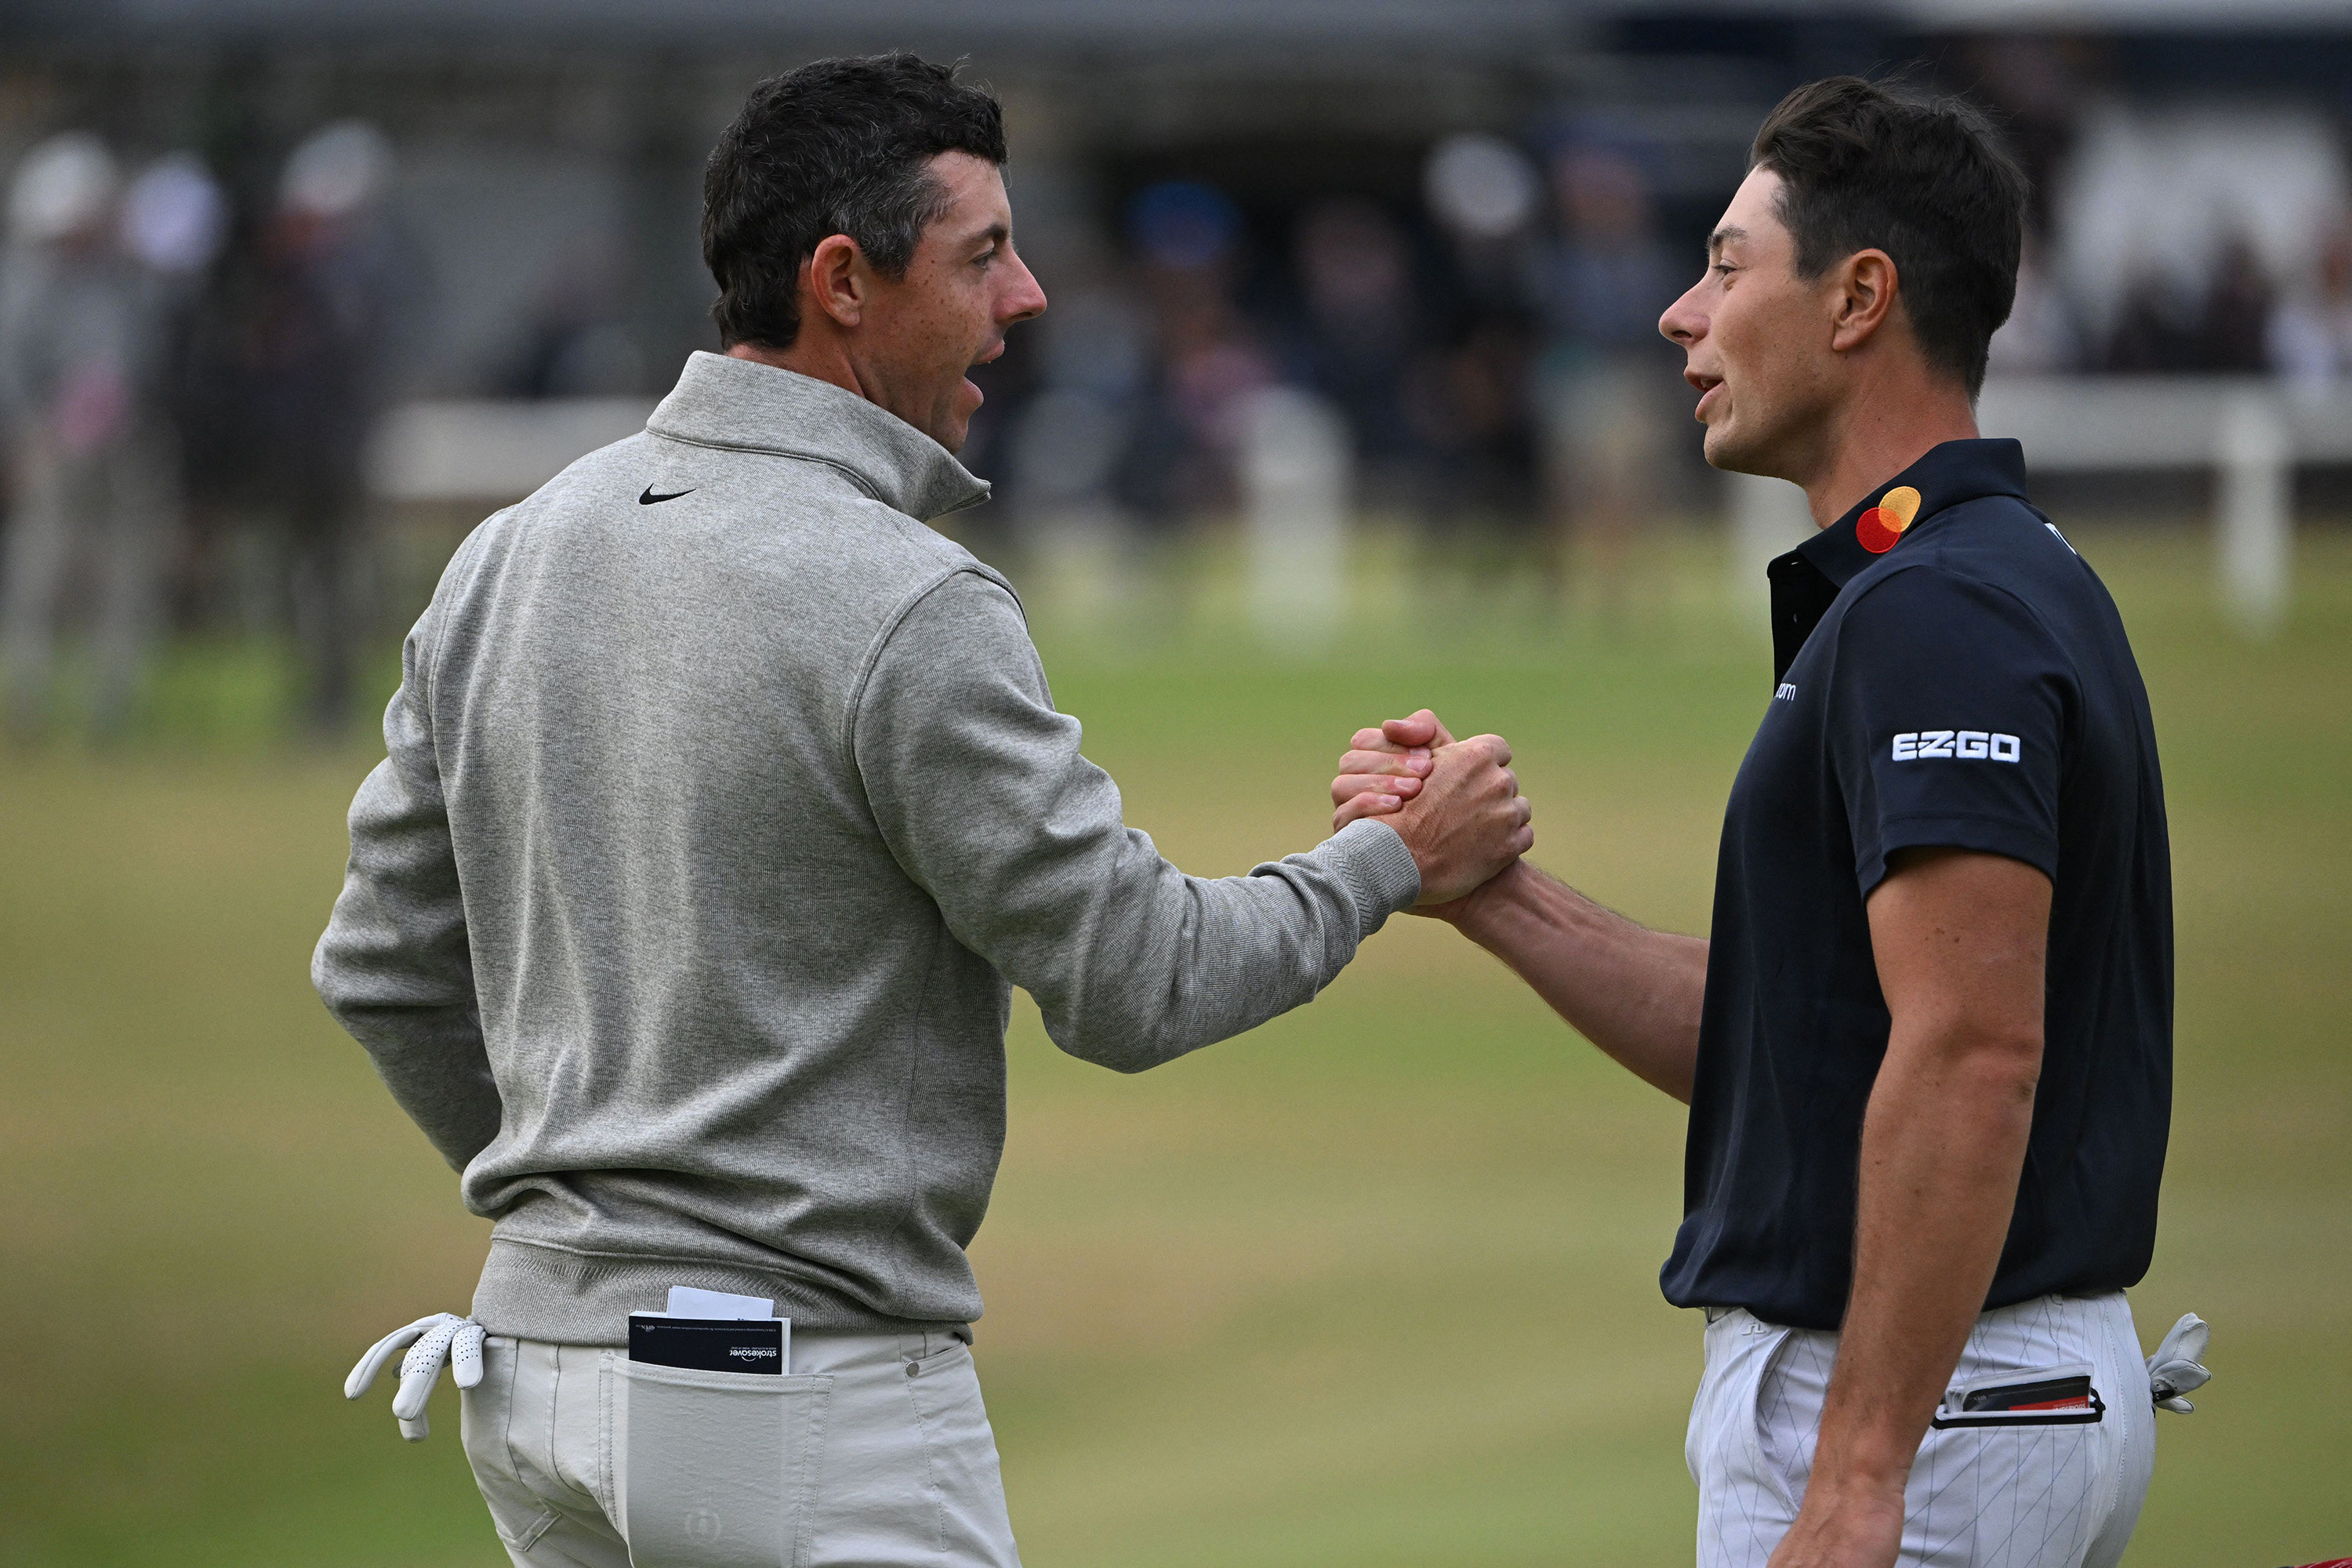 Viktor Hovland, (right) and Rory McIlroy shake hands on the 18th green after their third rounds of The 150th Open at St Andrews. Photo: AFP